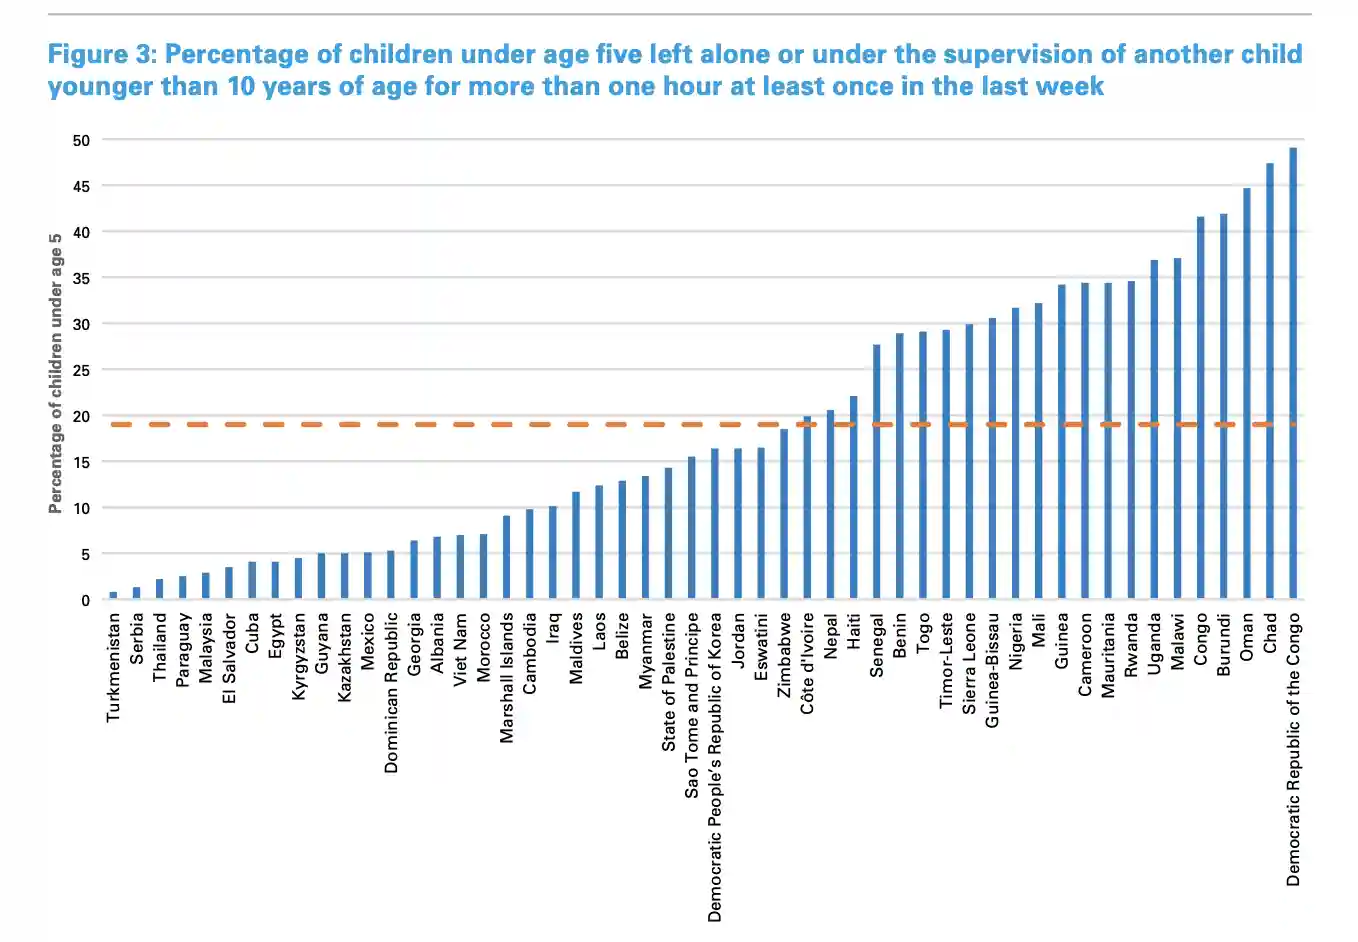 Figure 4 - Percentage of children under age five left alone or under the supervision of another child younger than 10 years of age for more than one hour at least once in the last week